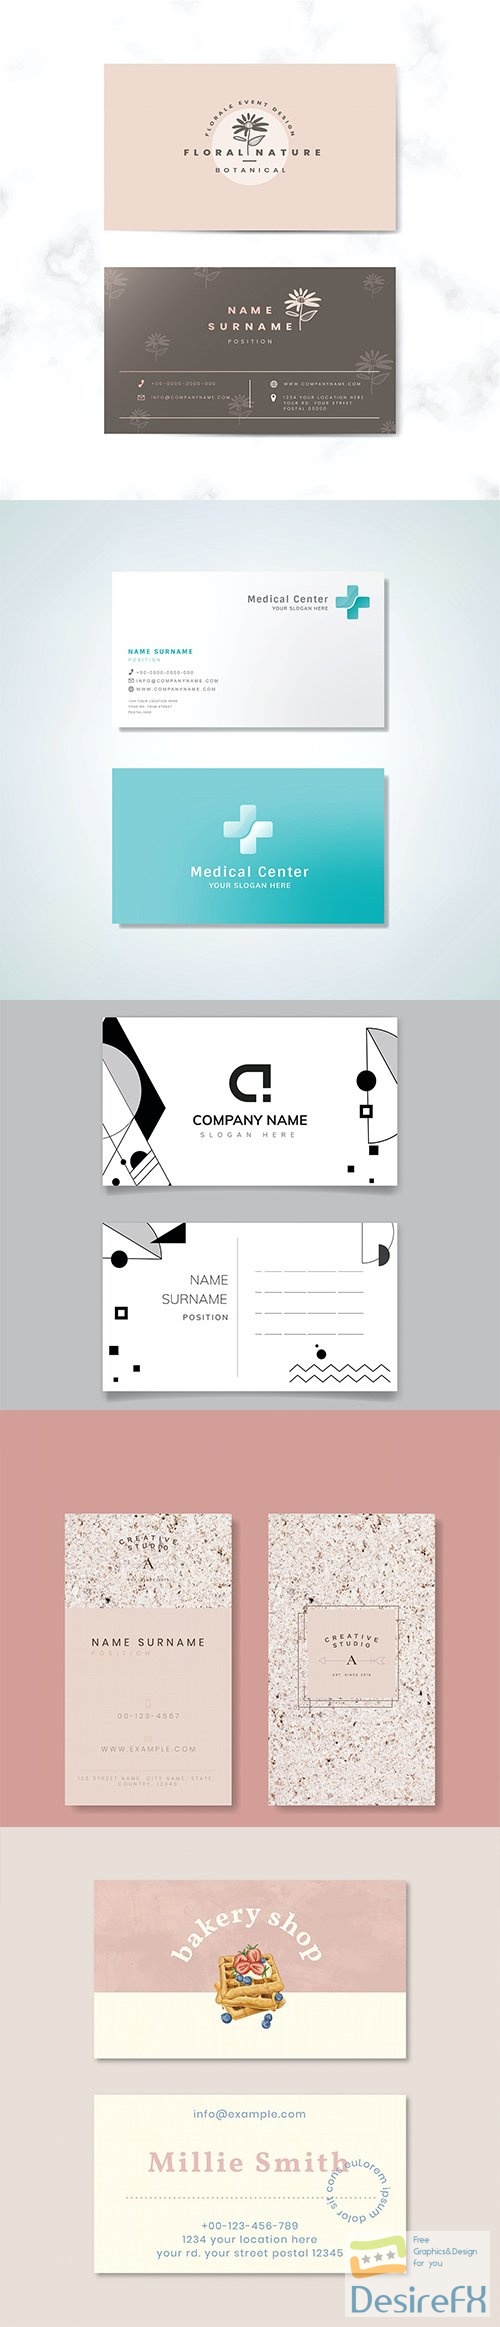 Set of business card template vol4